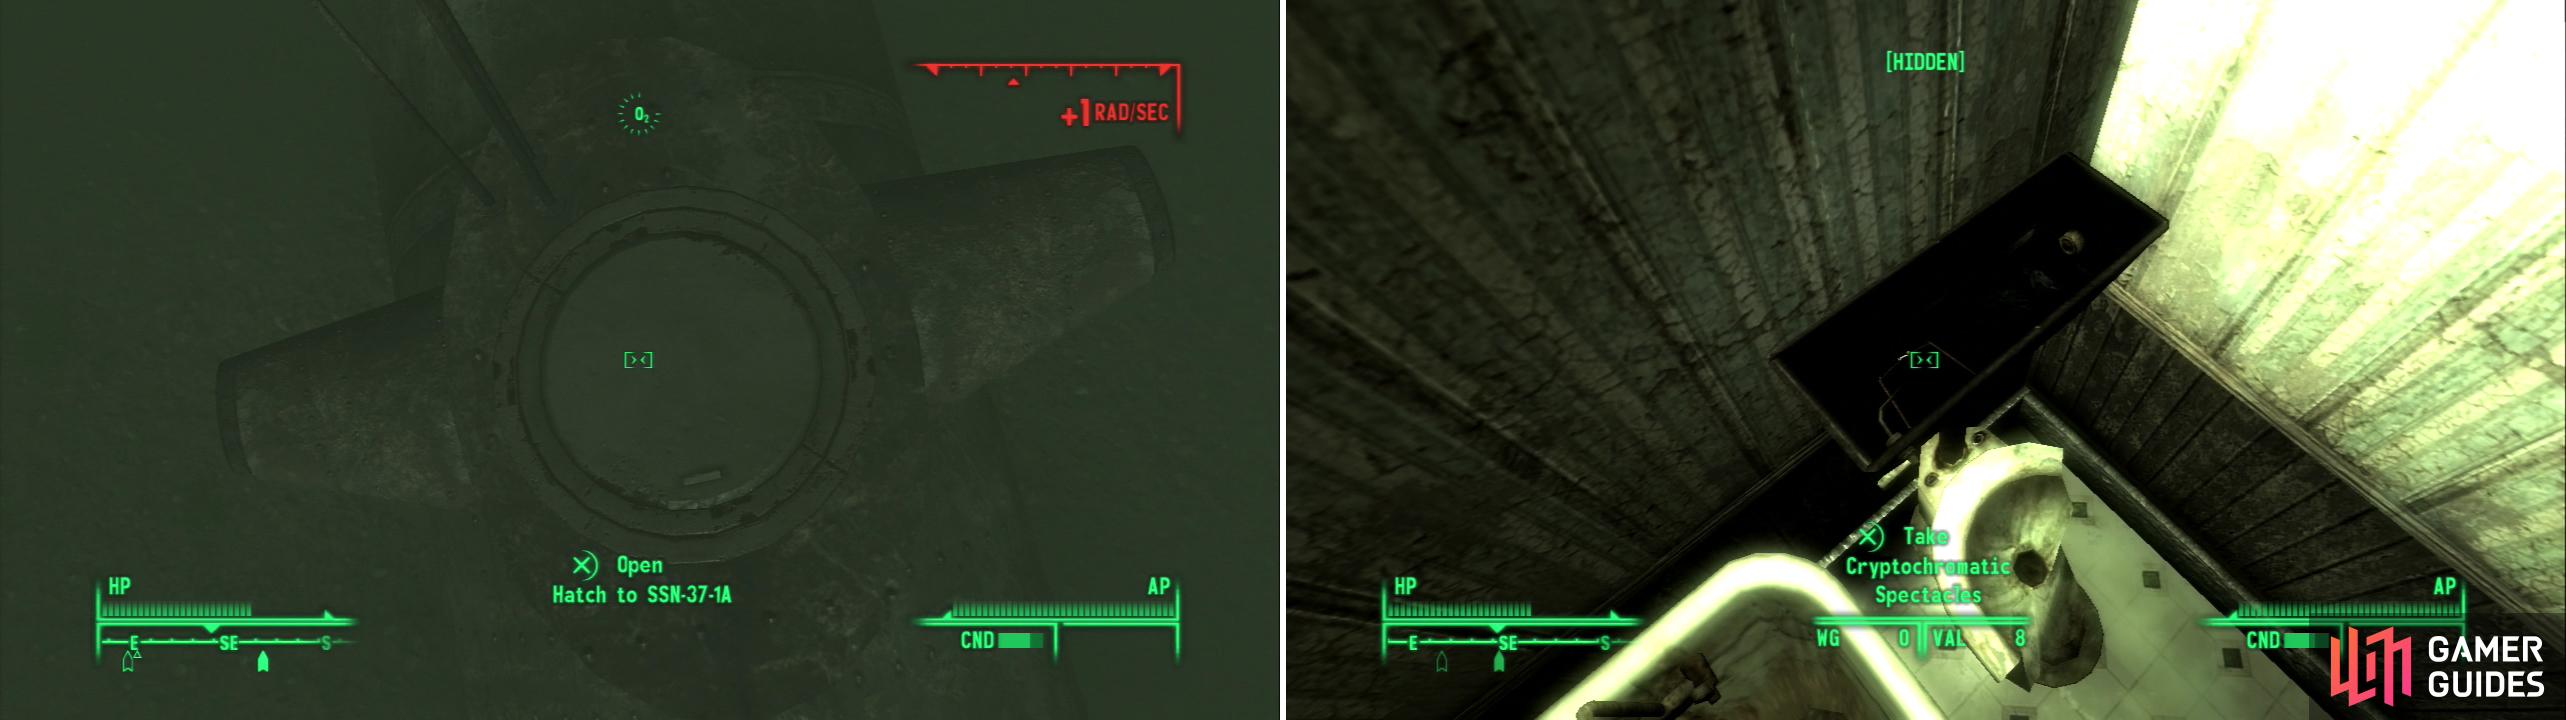 Dive down to find the sunken pocket submarine (left). Once the submarine is detonated, return to the Homestead Motel to find your new orders, and the Cryptochromatic Spectacles (right).